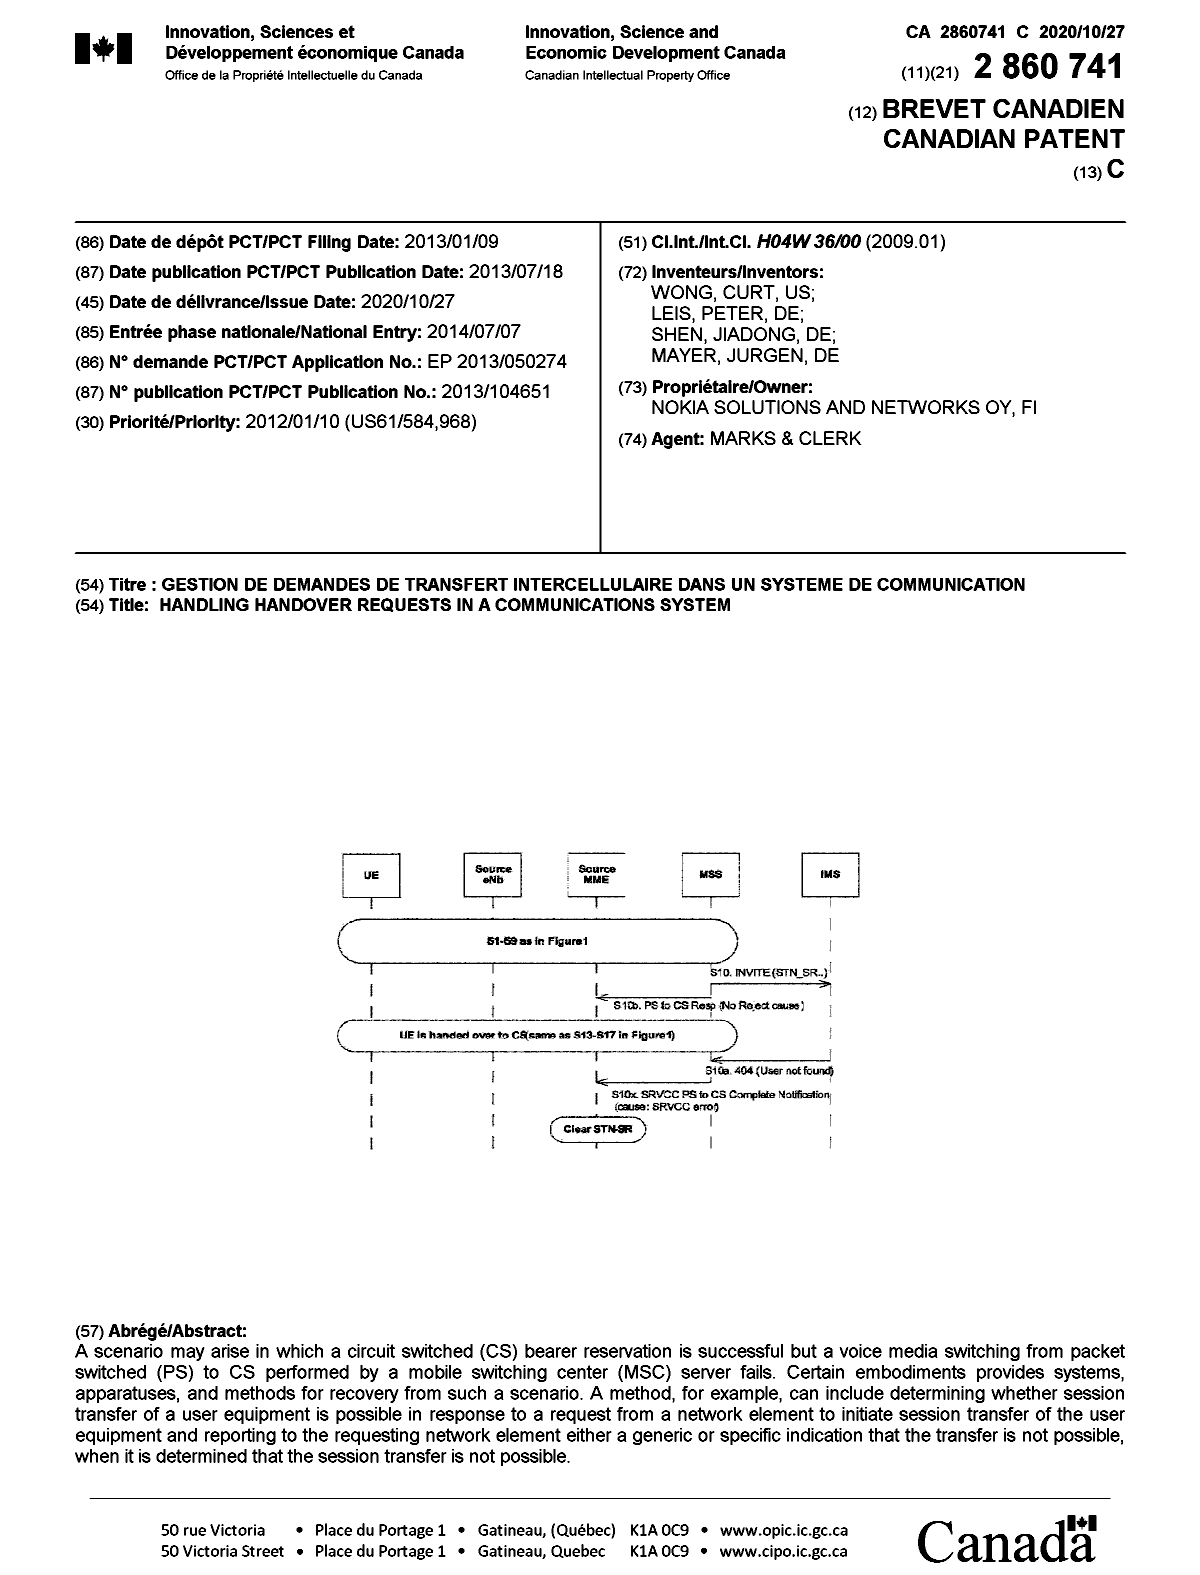 Canadian Patent Document 2860741. Cover Page 20200925. Image 1 of 1